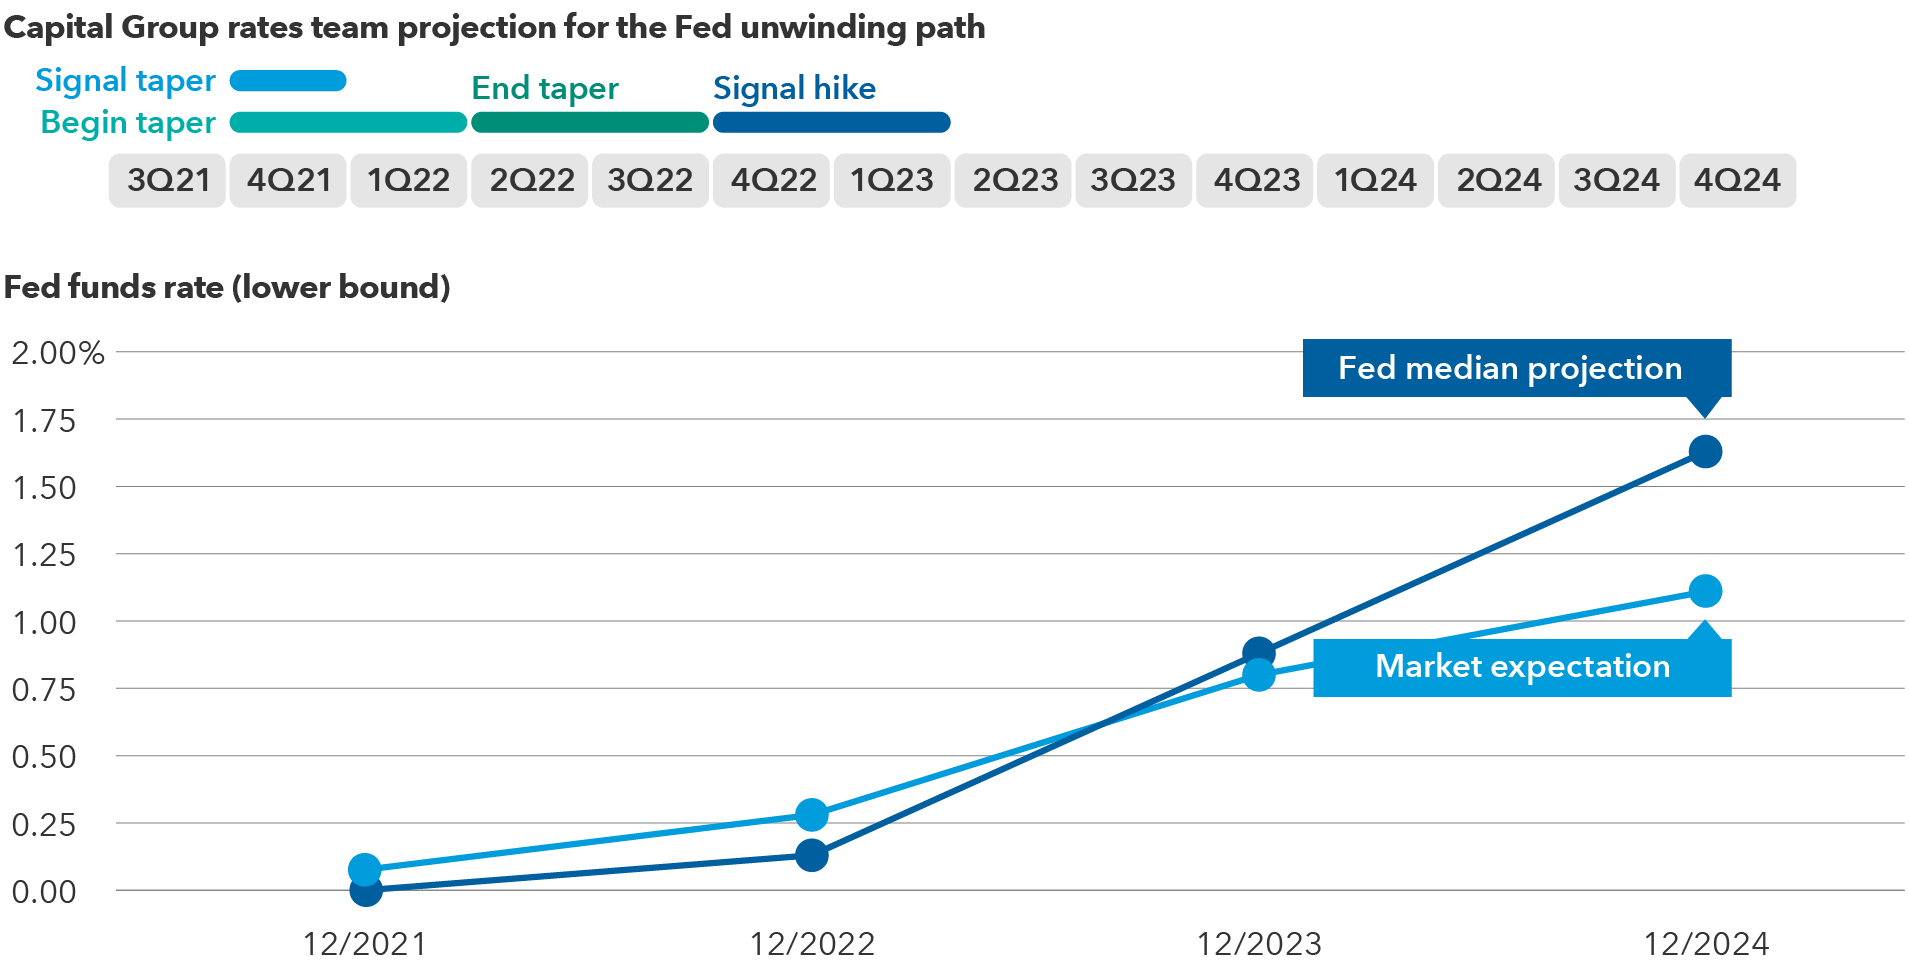 The exhibit shows a timeline from 2021 through 2024. At the topmost part of the chart are Capital Group’s rates team estimates for when the Fed is likely to signal a rate hike. It may begin in the fourth quarter of 2021 with the announcement of an intention to taper asset purchases, with an actual program to begin as early as that quarter or the first quarter of 2022. That program would probably end as soon as the second quarter of 2022 or as late as the third quarter of 2022. It would then signal an initial rate hike as early as the fourth quarter of 2022 or as late as the first quarter of 2023. Below this is the Fed’s dot plot of committee member median expectations and market expectations based on future pricing for the federal funds rate range lower bound. It shows the Fed projections for the end of 2021, 2022, 2023 and 2024 of 0.0%, 0.1%, 0.9% and 1.6%, respectively. For market projections, it shows just above 0.0%, 0.3%, 0.8% and 1.1%, respectively.